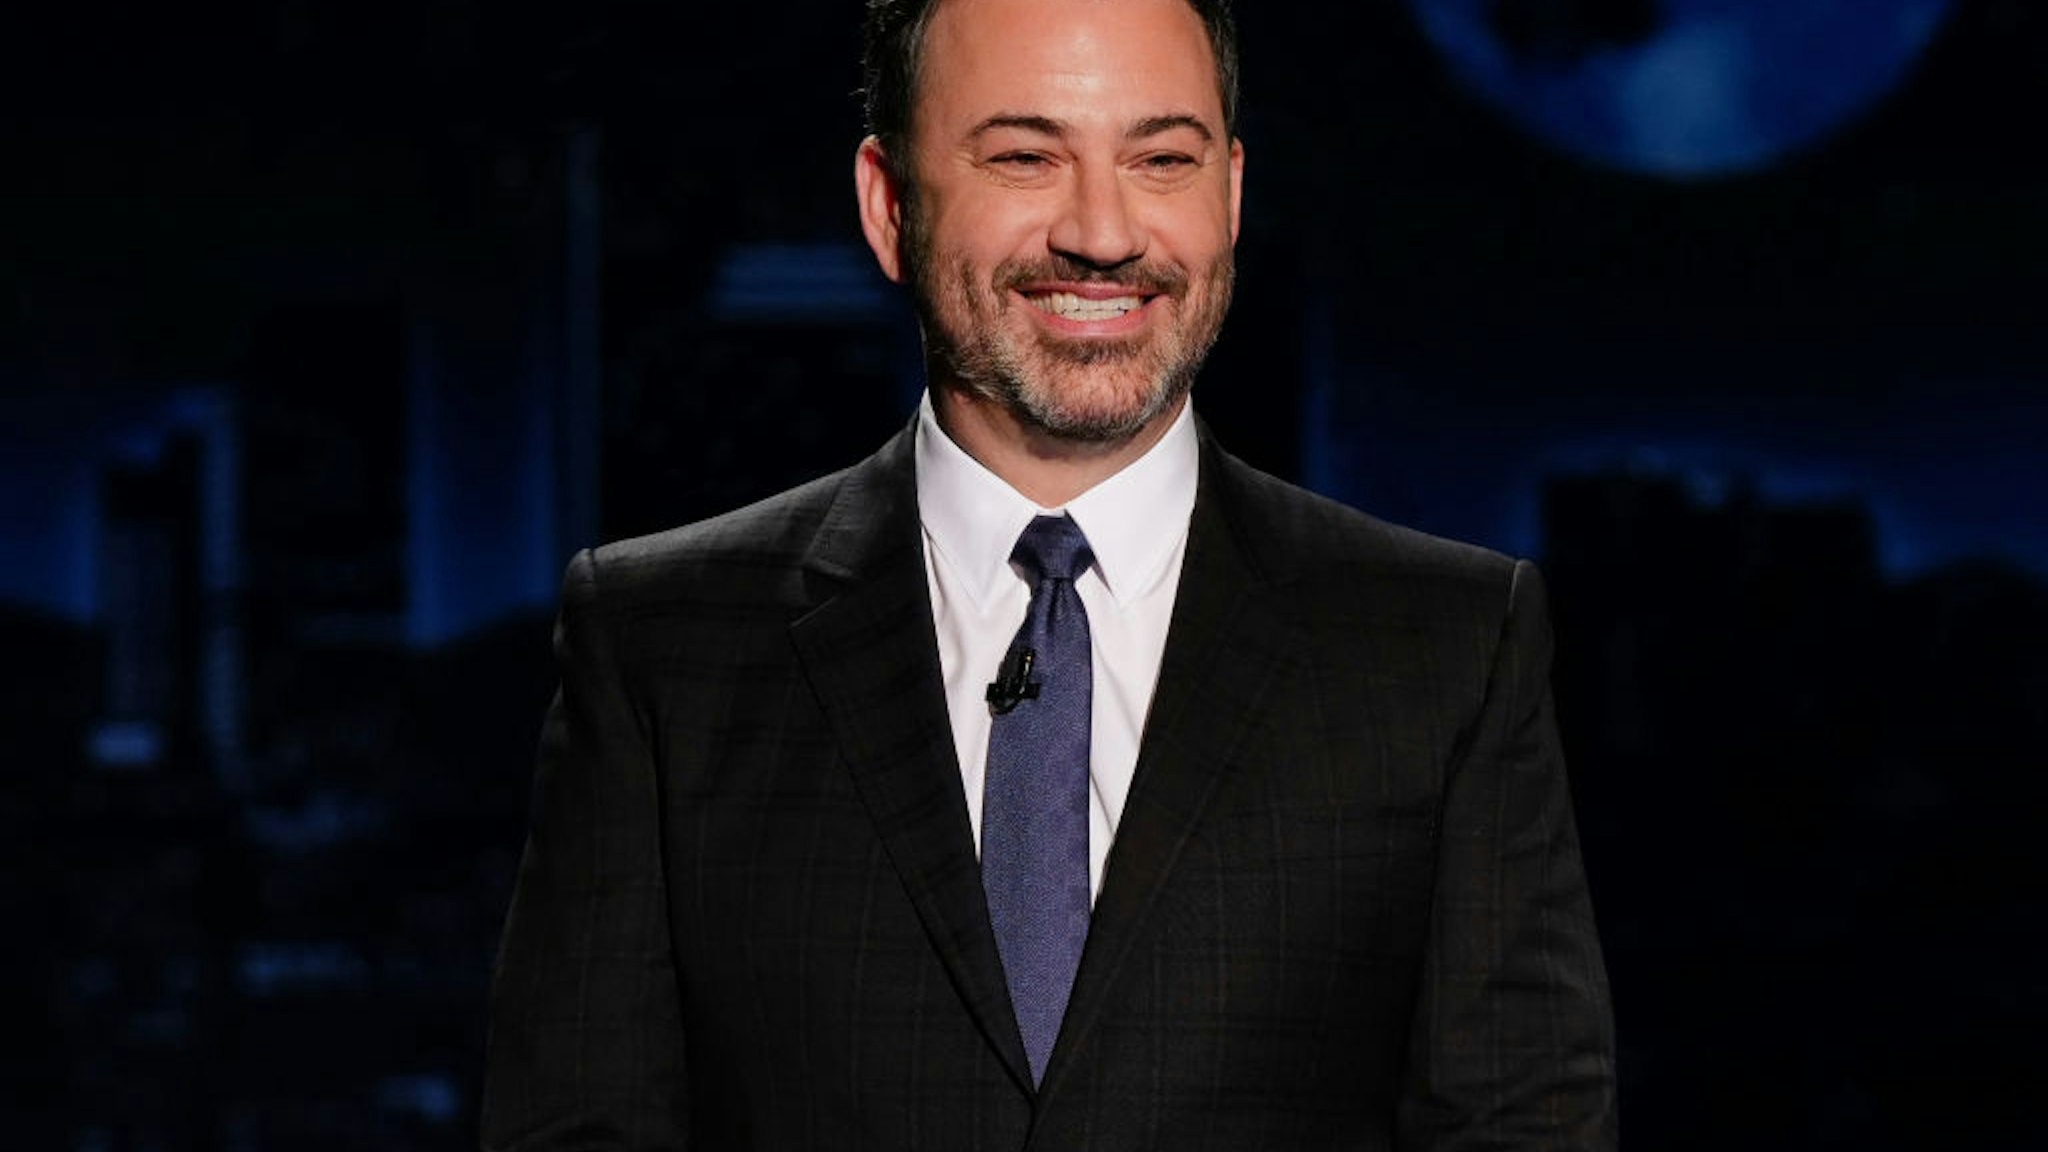 "Jimmy Kimmel Live!" airs every weeknight at 11:35 p.m. EST and features a diverse lineup of guests that include celebrities, athletes, musical acts, comedians and human interest subjects, along with comedy bits and a house band. The guests for Friday, November 6, included Charlie Hunnam (Jungleland), George Stephanopoulos, and musical guest Why Dont We.